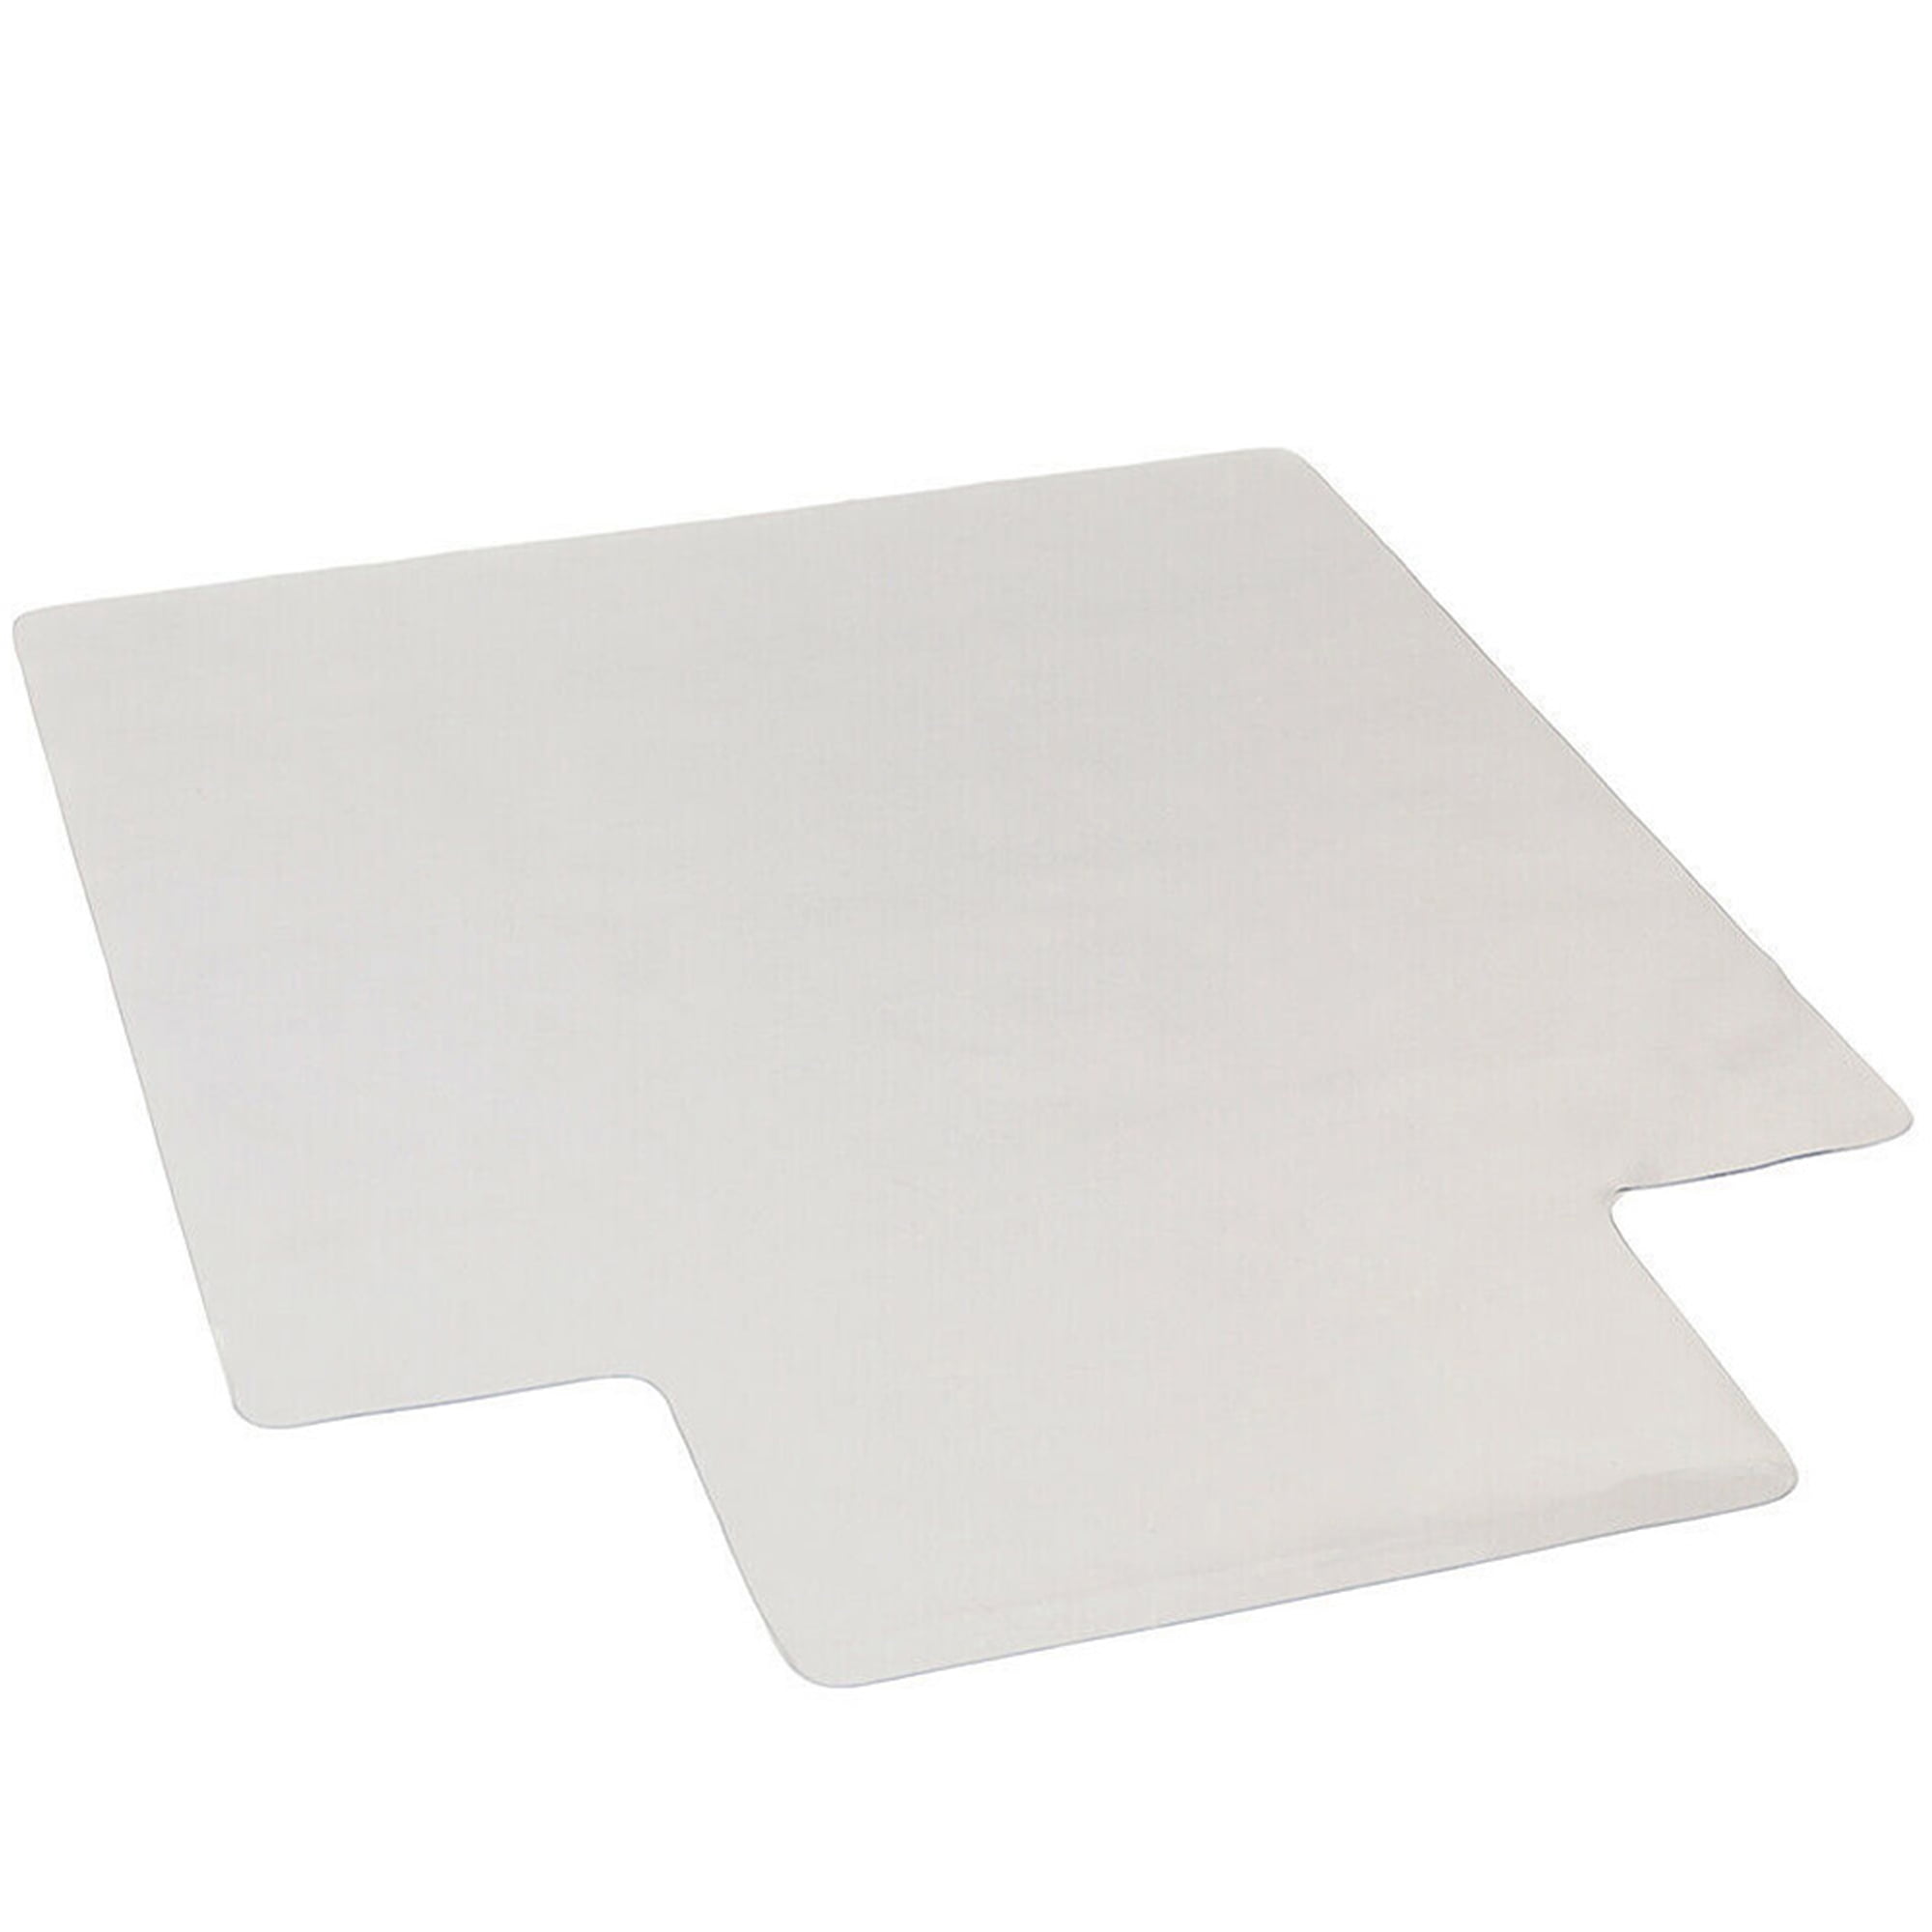 Office Chair mat for Hardwood Floor Easy Glide for Chairs 15inch, Transparent 19 x 23 inches Flat Without Curling Floor Mats for Computer Desk  